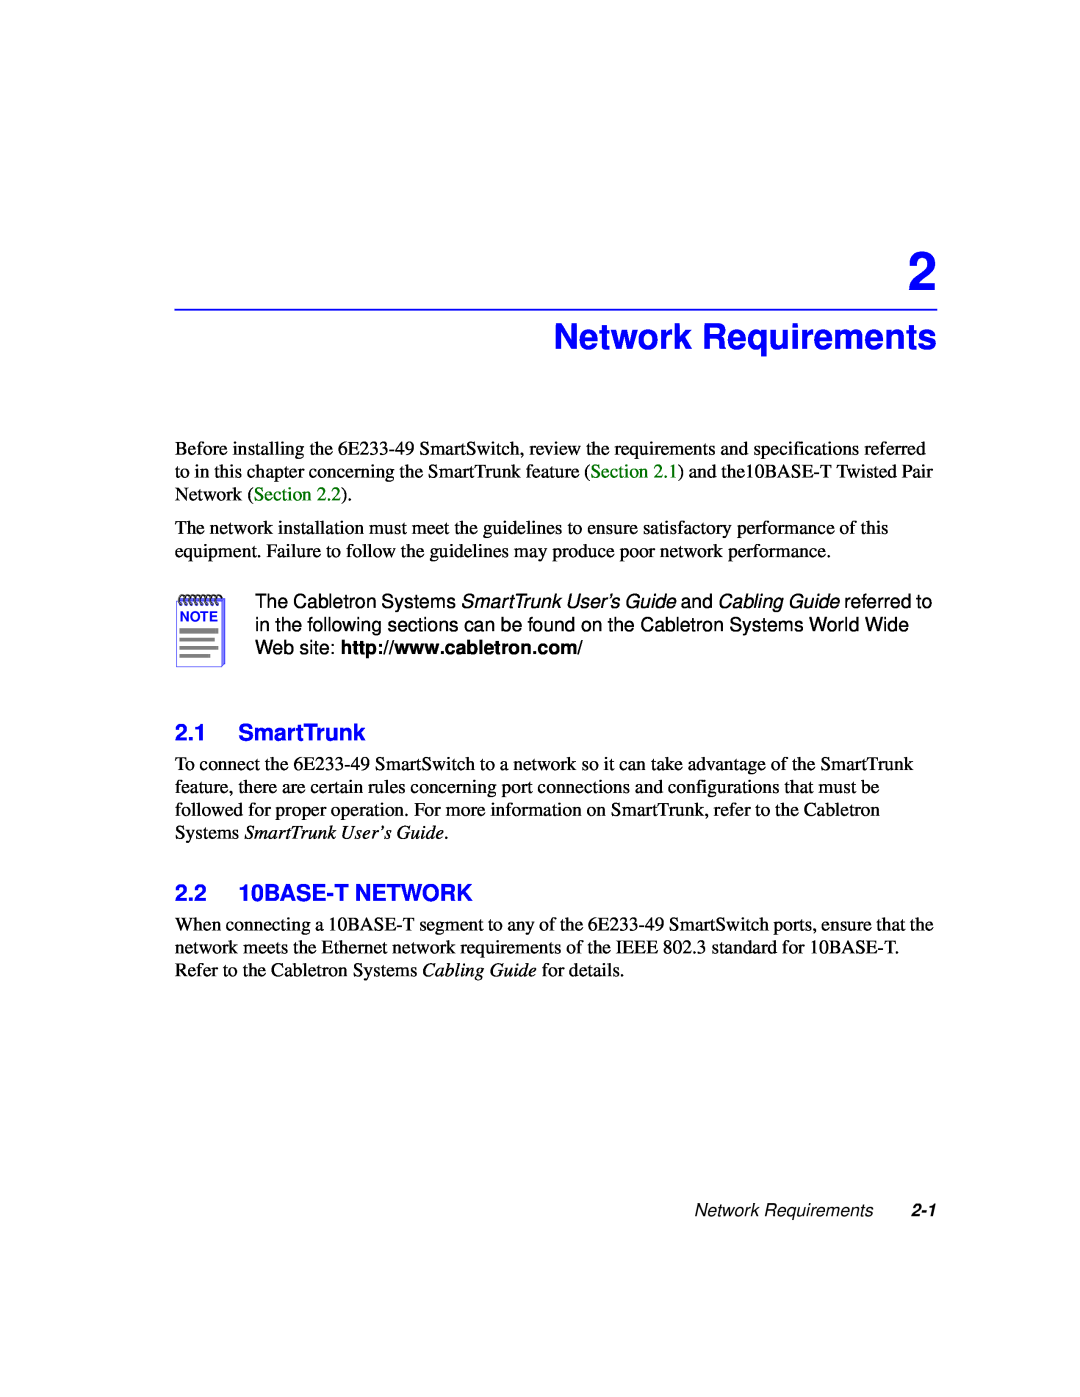 Cabletron Systems 6000 manual Network Requirements, SmartTrunk, 2.2 10BASE-T NETWORK 